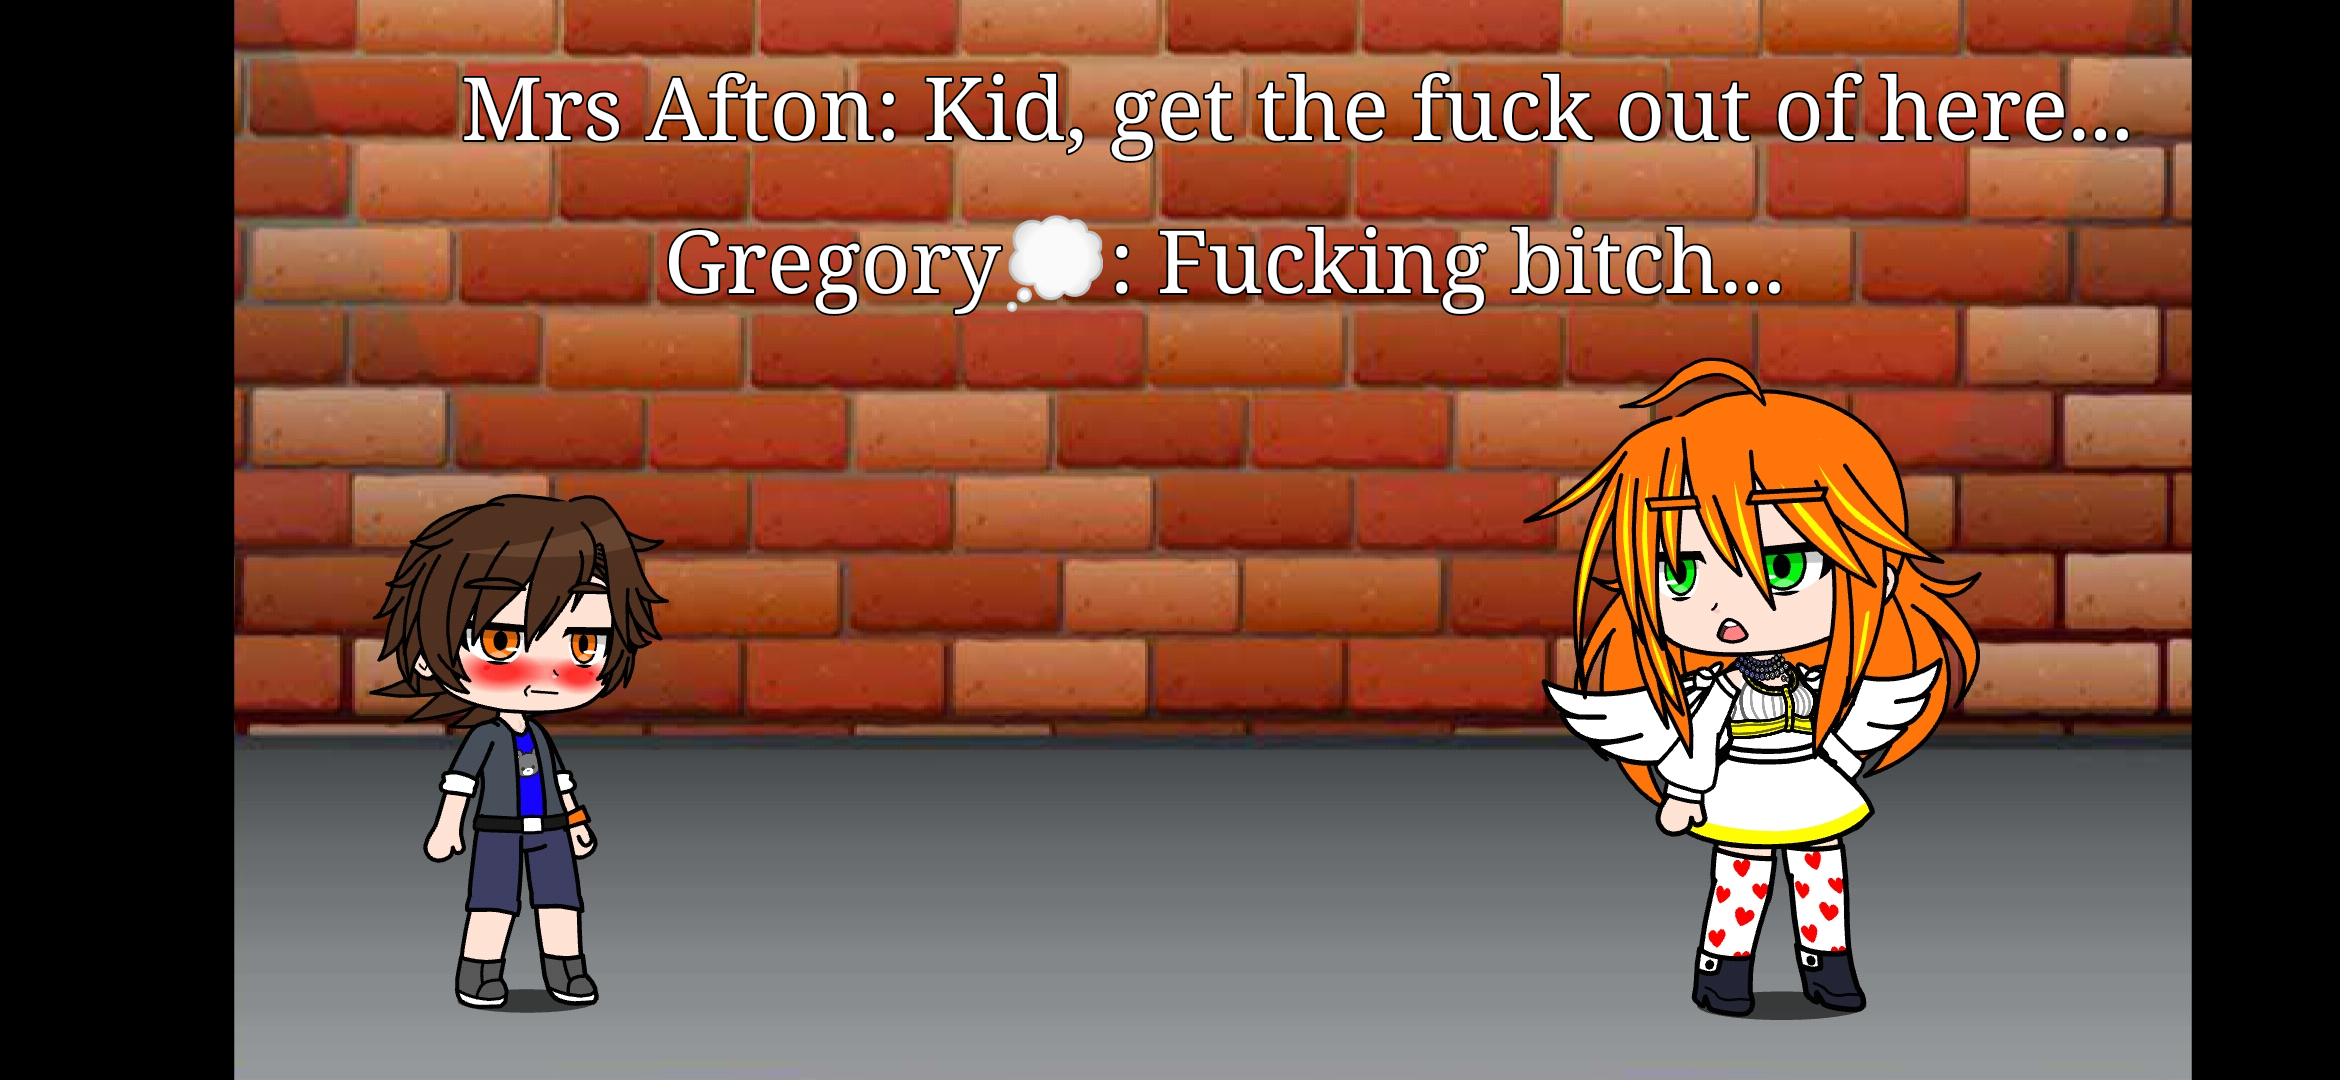 Gregory fuck Mrs Afton